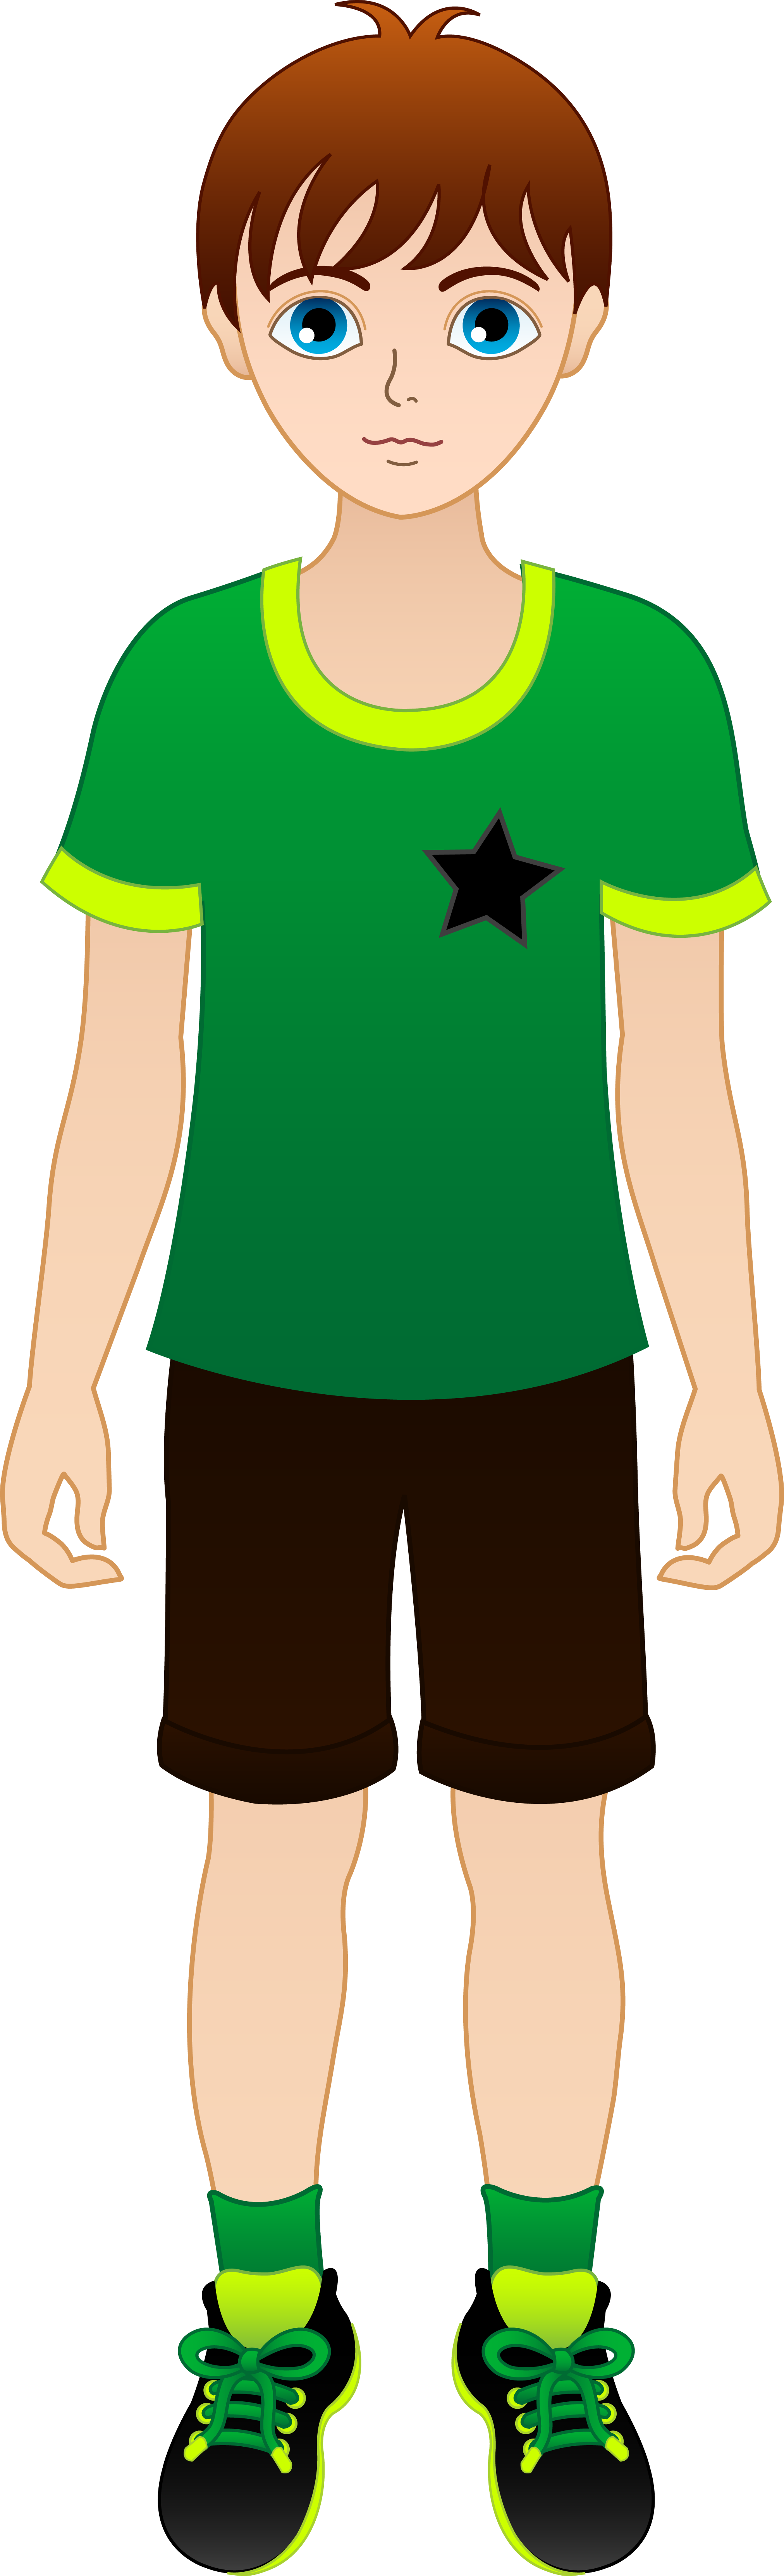 Young boy clipart 